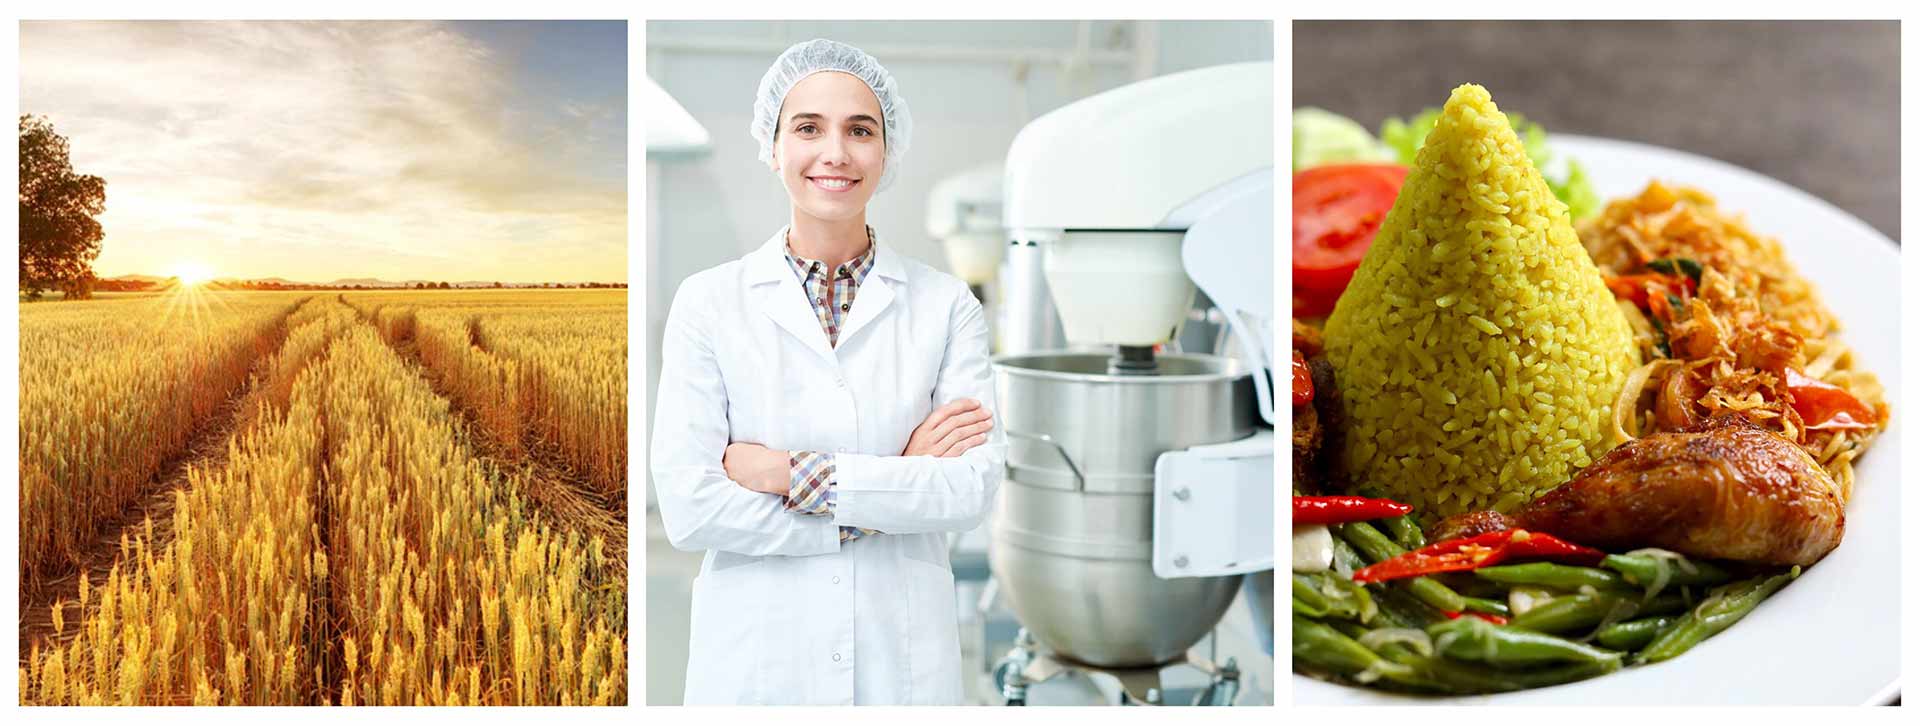 photo montage of three photos, one of a field, the second of a woman in a sterile industrial environment and the third of food on a plate.